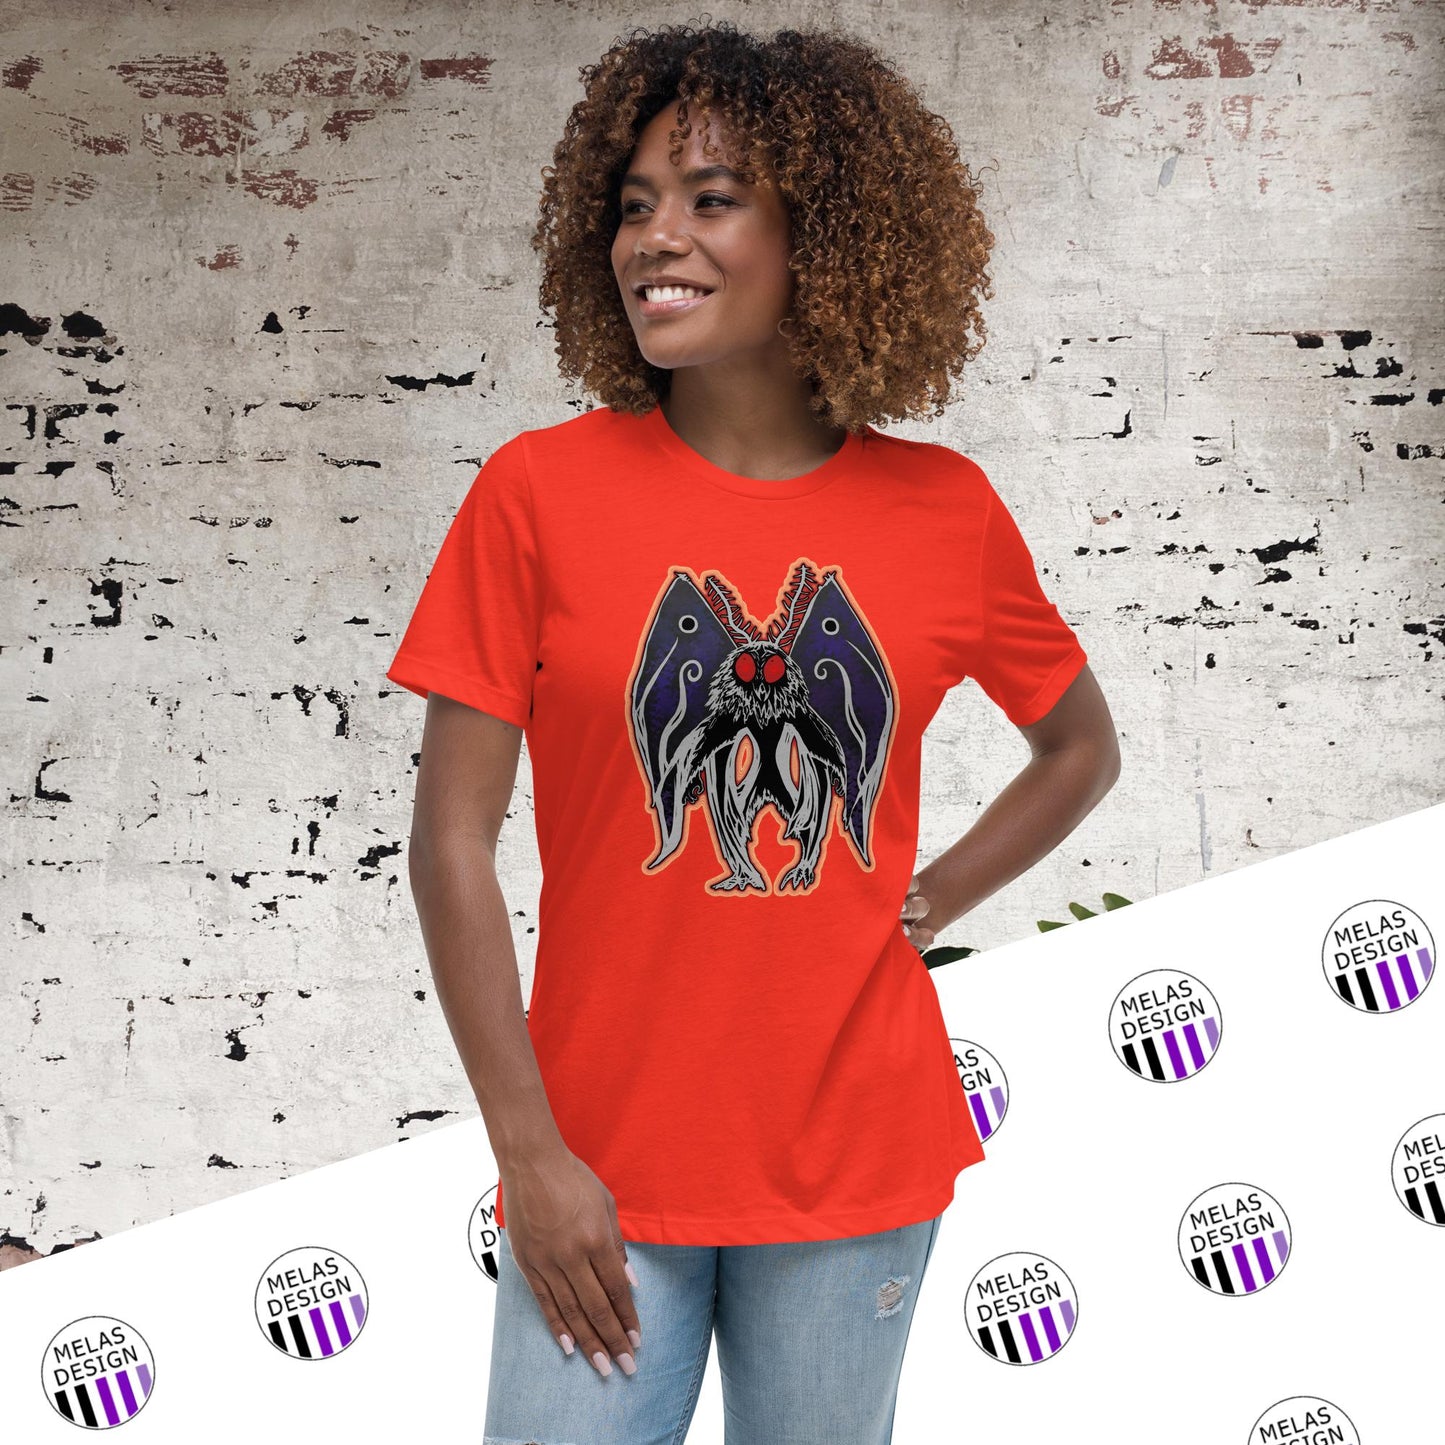 Mothman Cryptid Women's Relaxed T-Shirt; mothman t-shirt; cryptid t-shirt; west virginia; point pleasant; Melasdesign; cryptid core; cryptids; cryptid collection; fashion; womens; S-3X